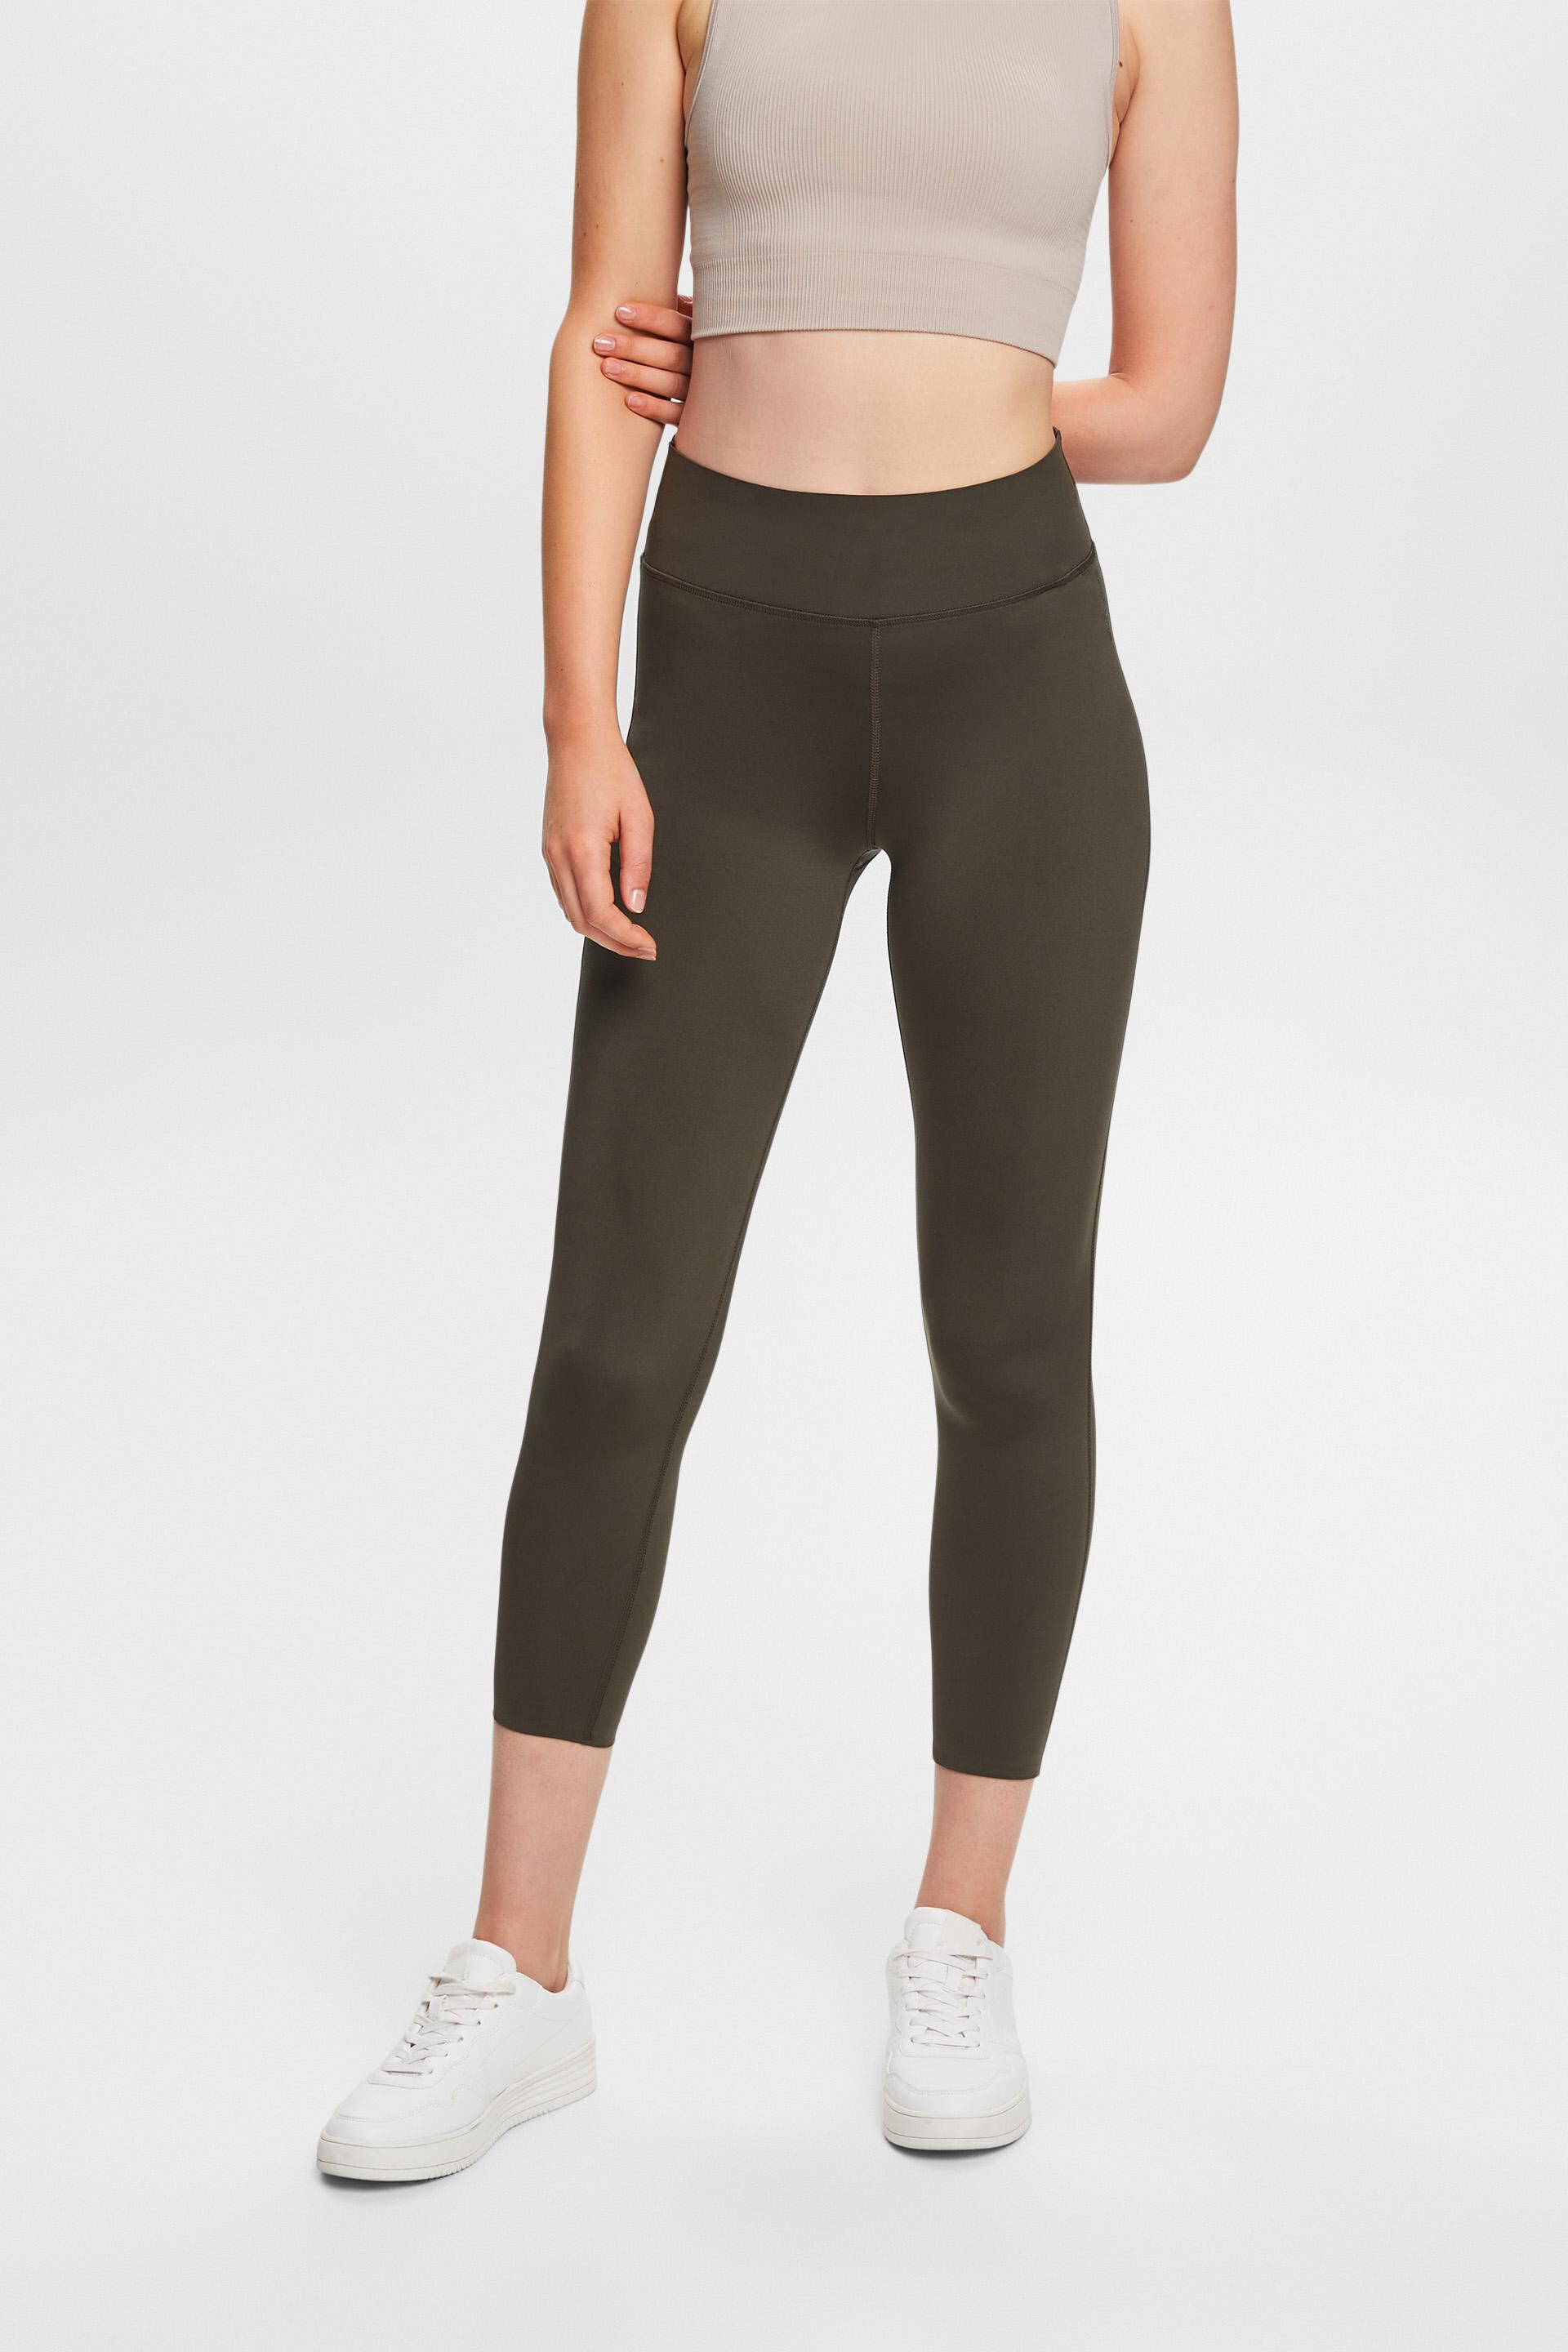 Esprit Active leggings Recycled: with E-DRY